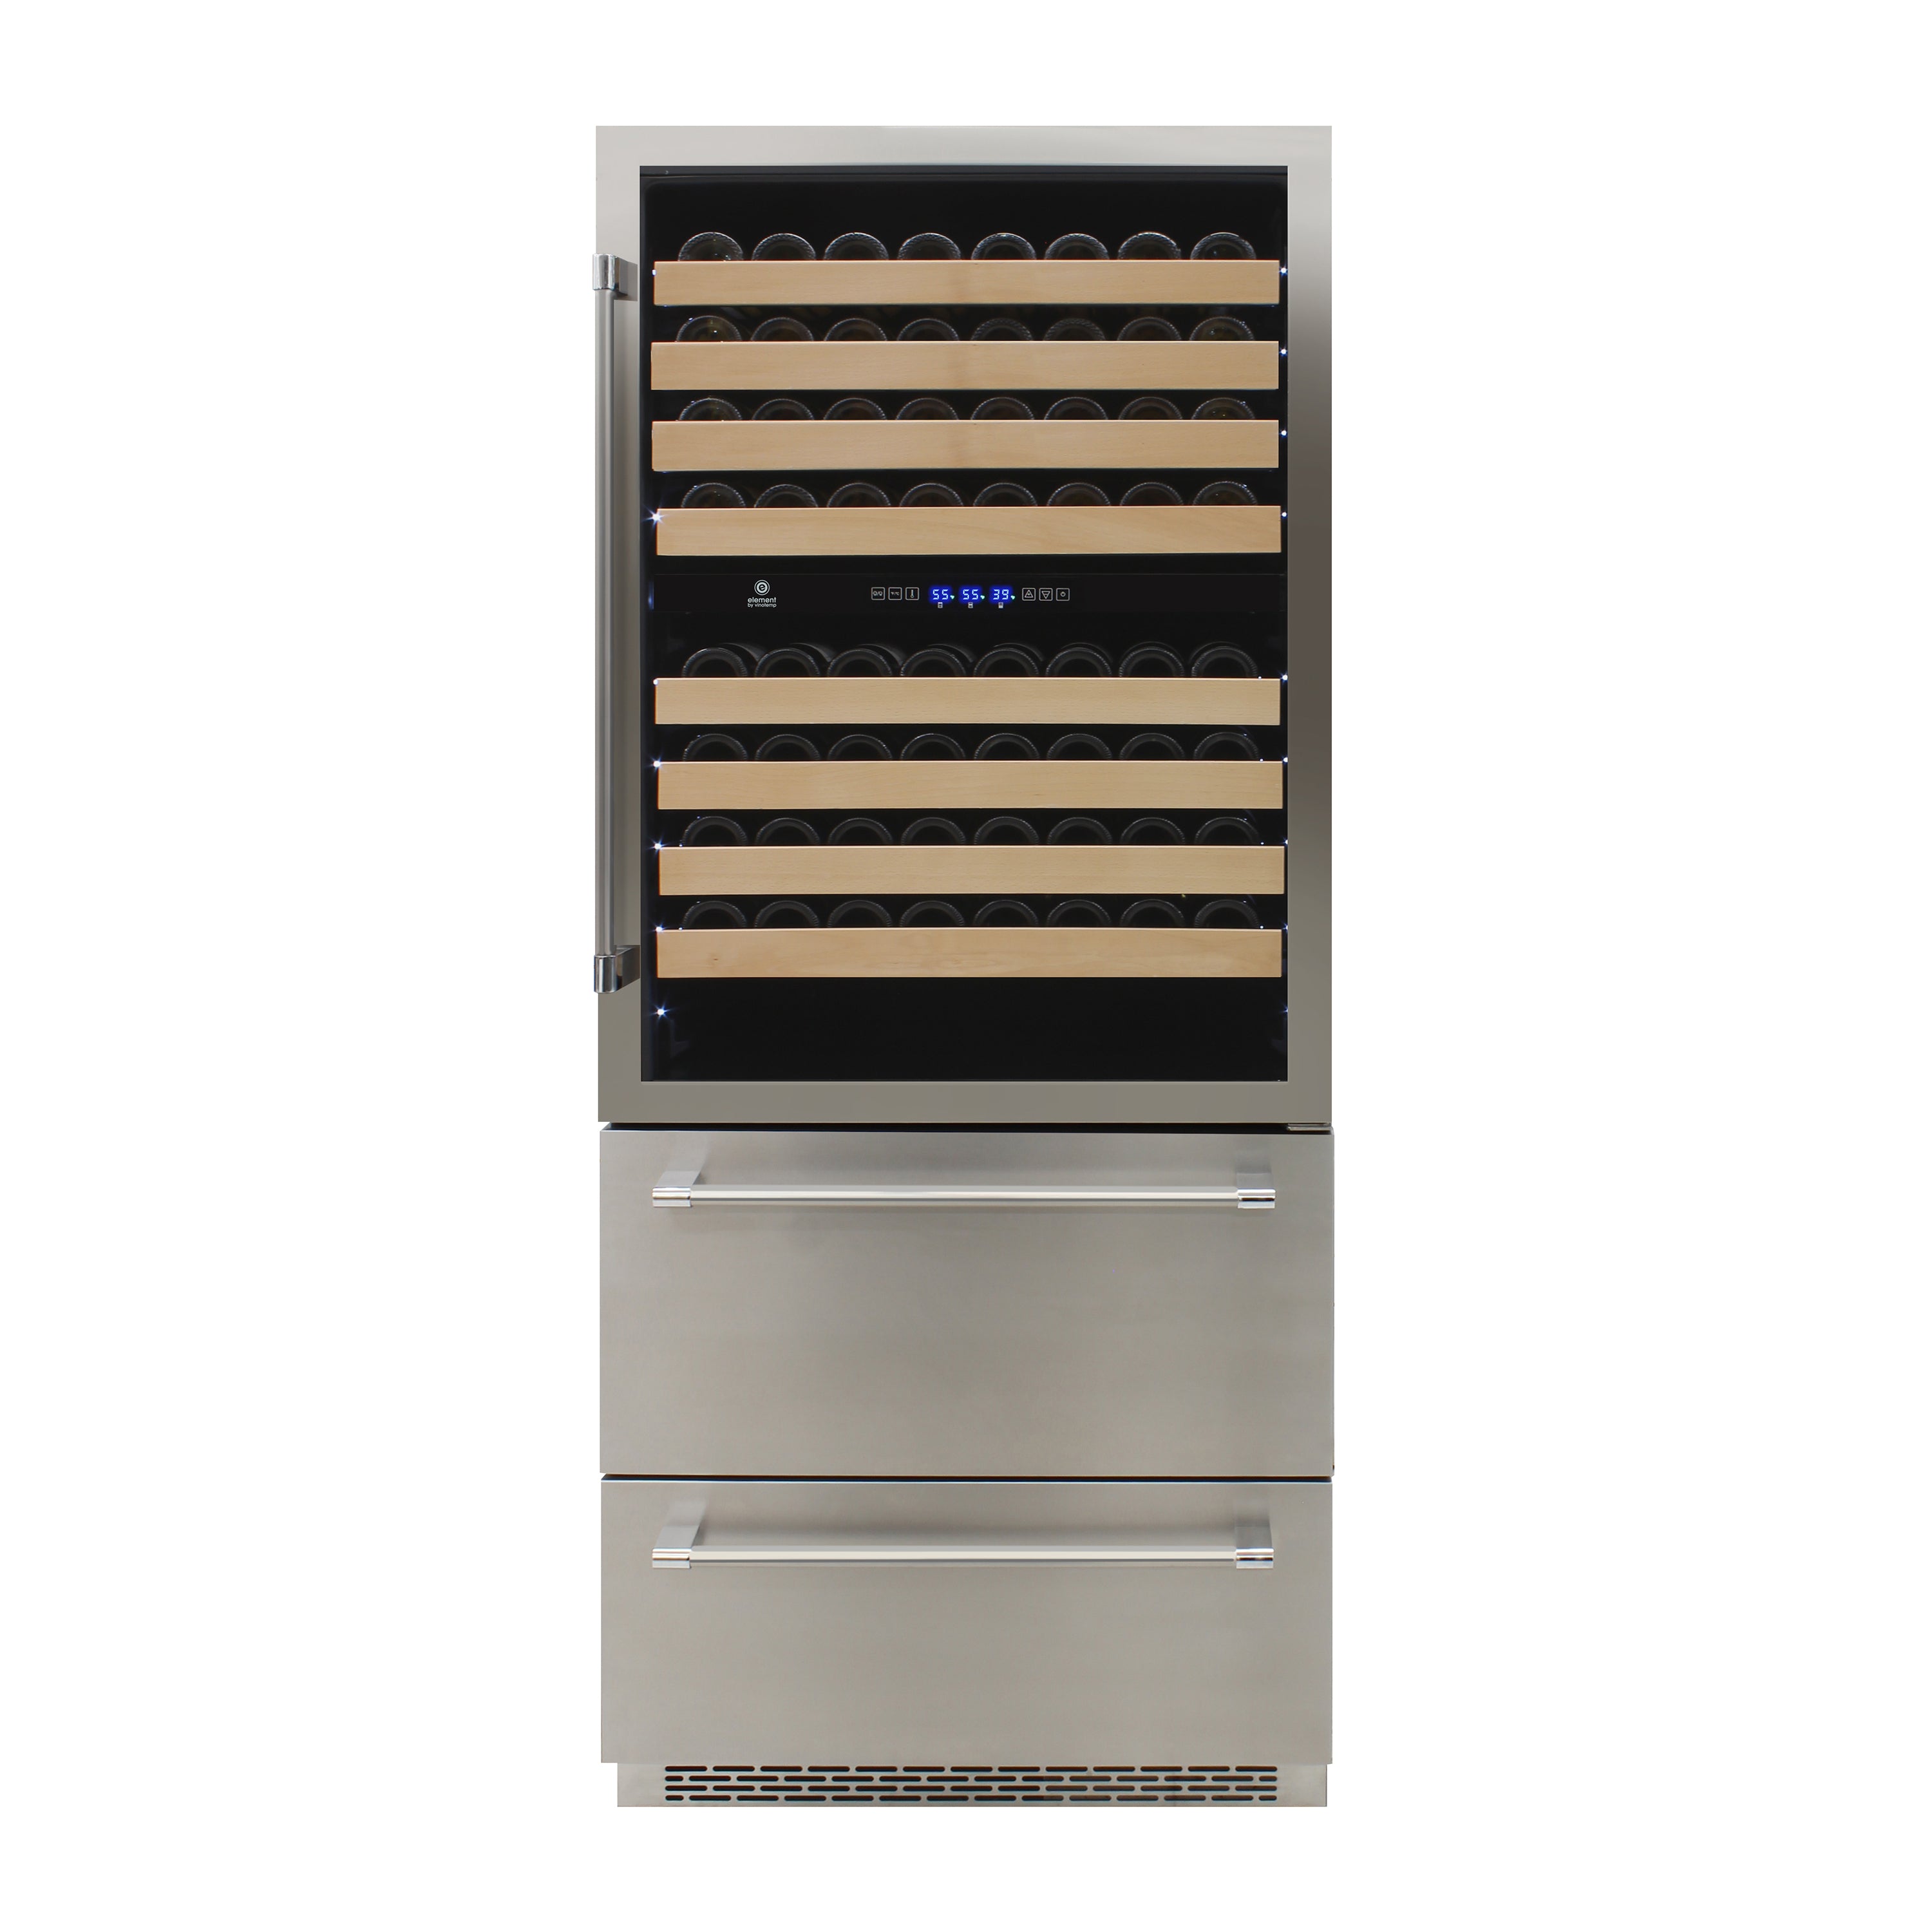 Vinotemp - EL-BWC30TB-S, Vinotemp Connoisseur Series Triple-Zone Wine and 2 Drawer Beverage Cooler, 135 Bottle Capacity, in Stainless Steel